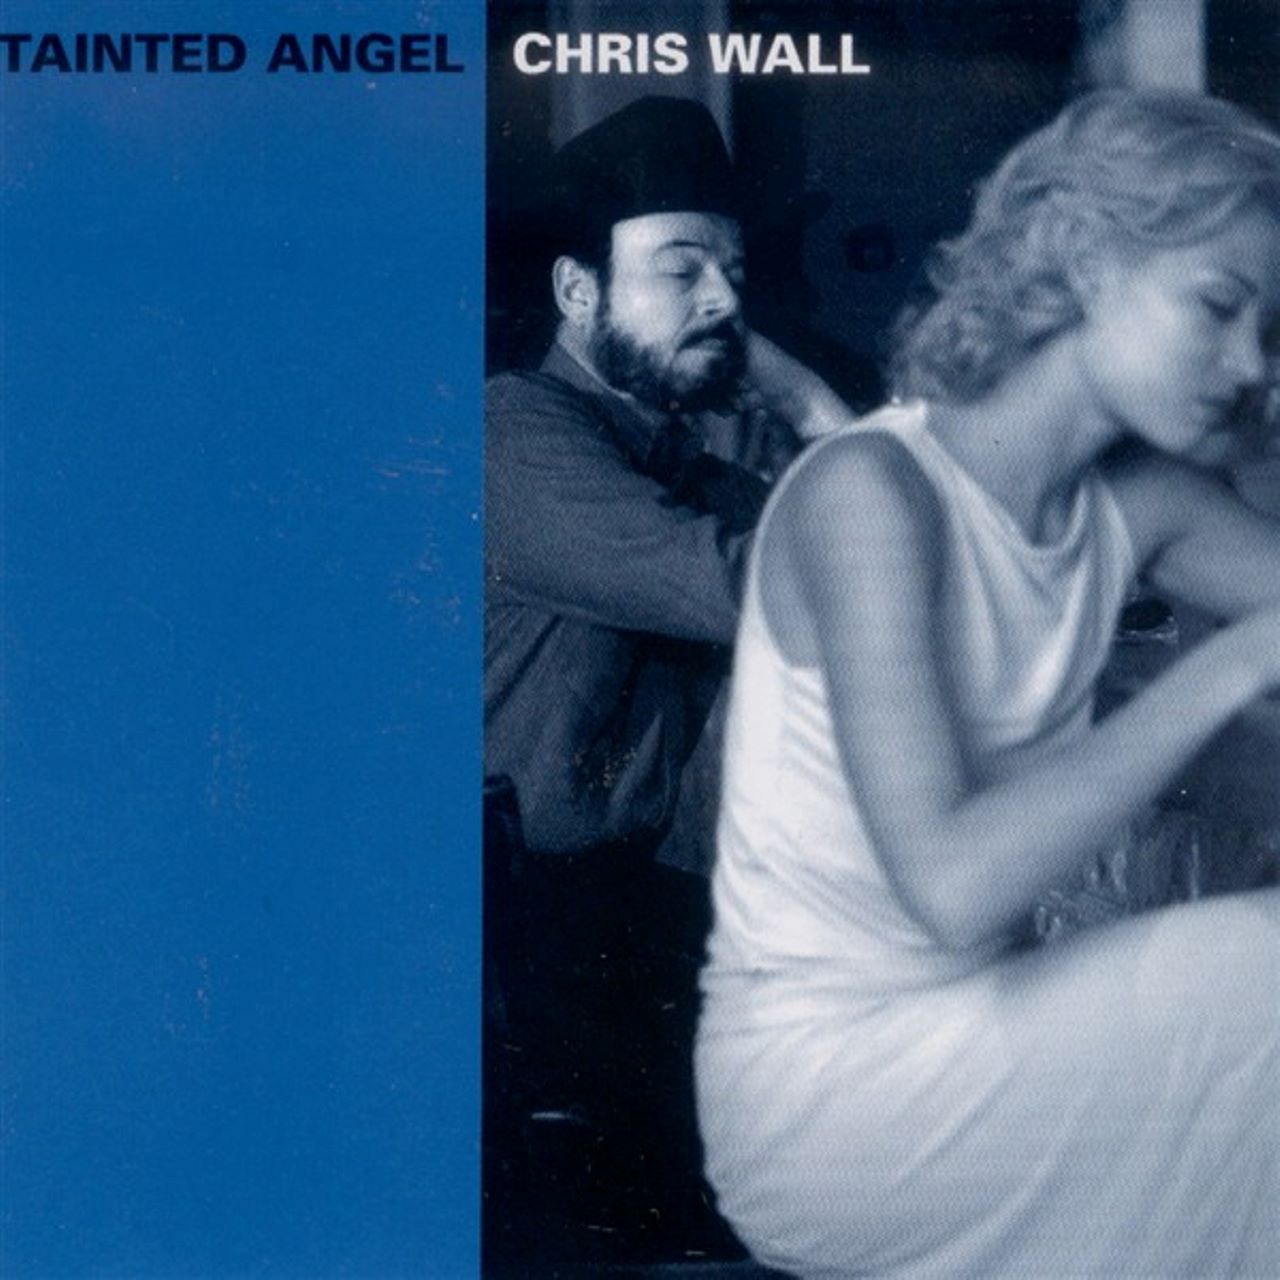 Chris Wall - Tainted Angel cover album